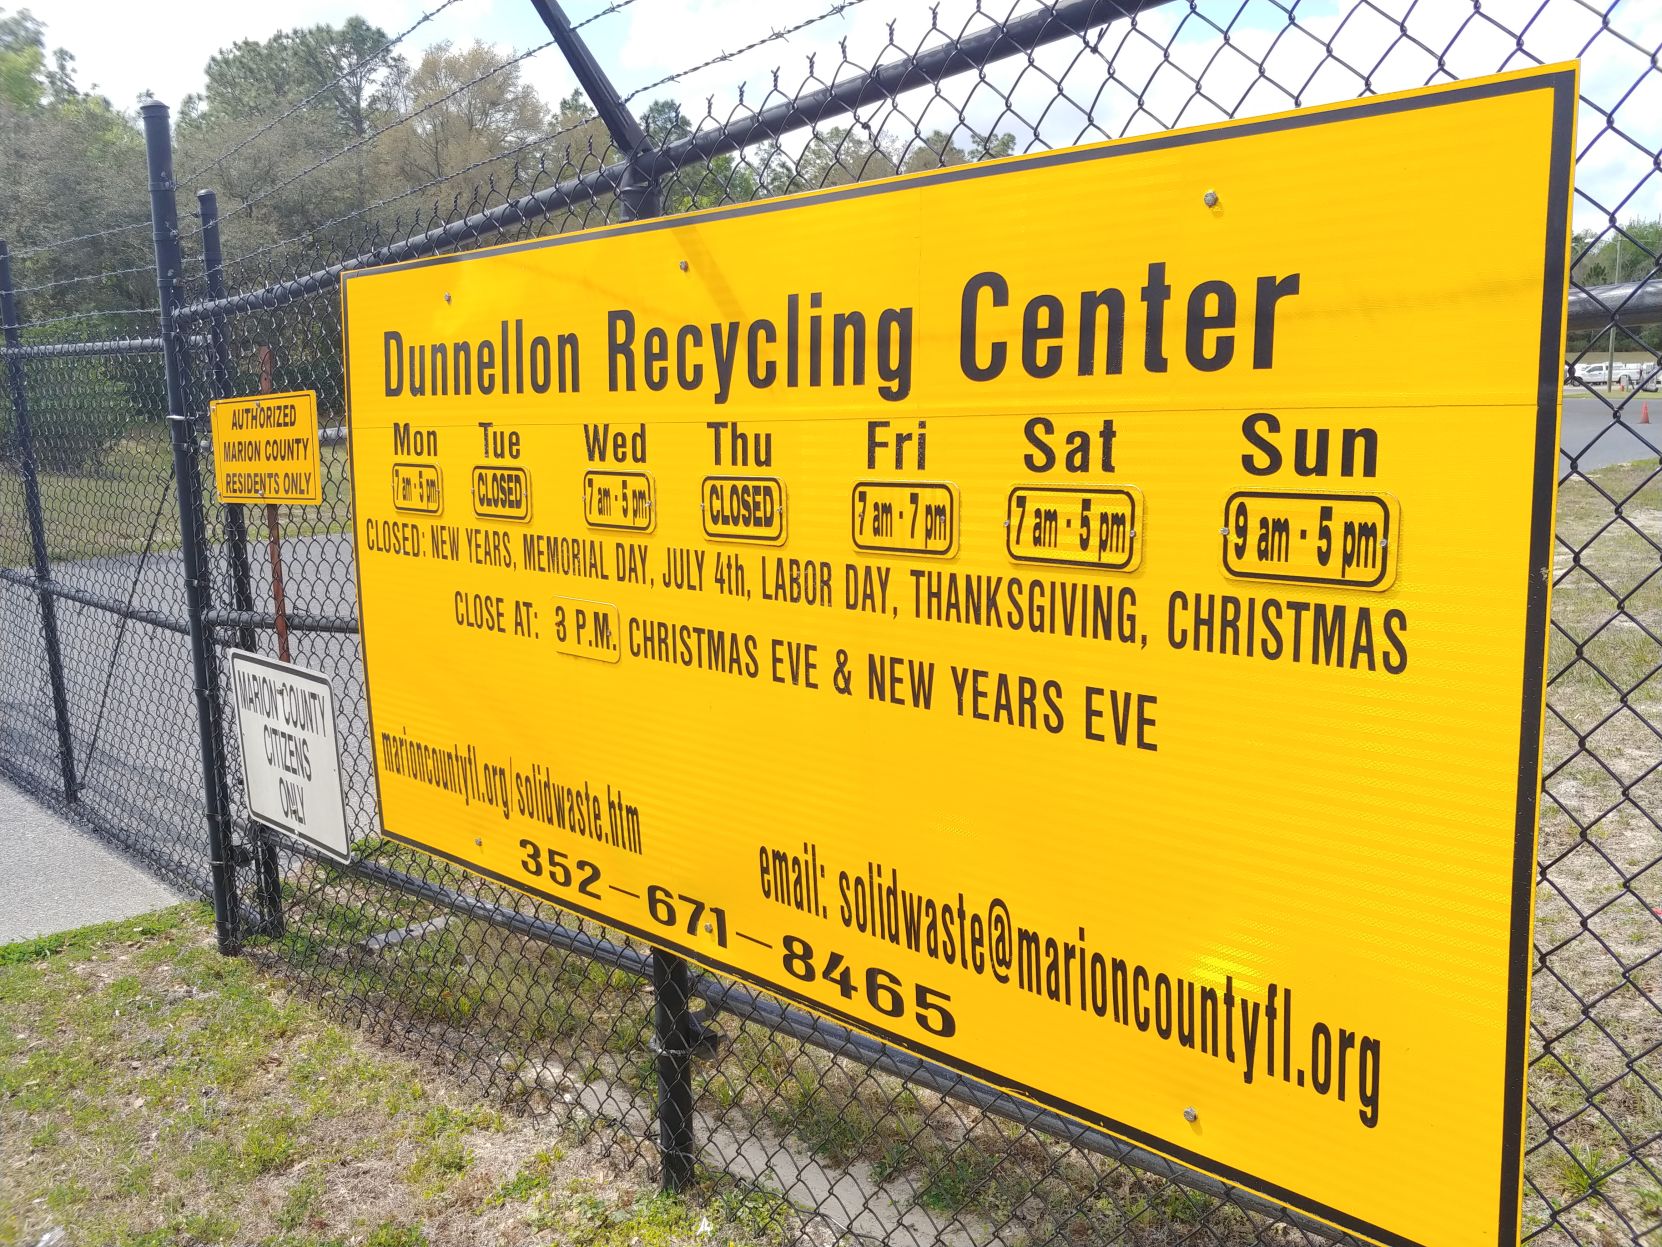 derry township recycling center hours